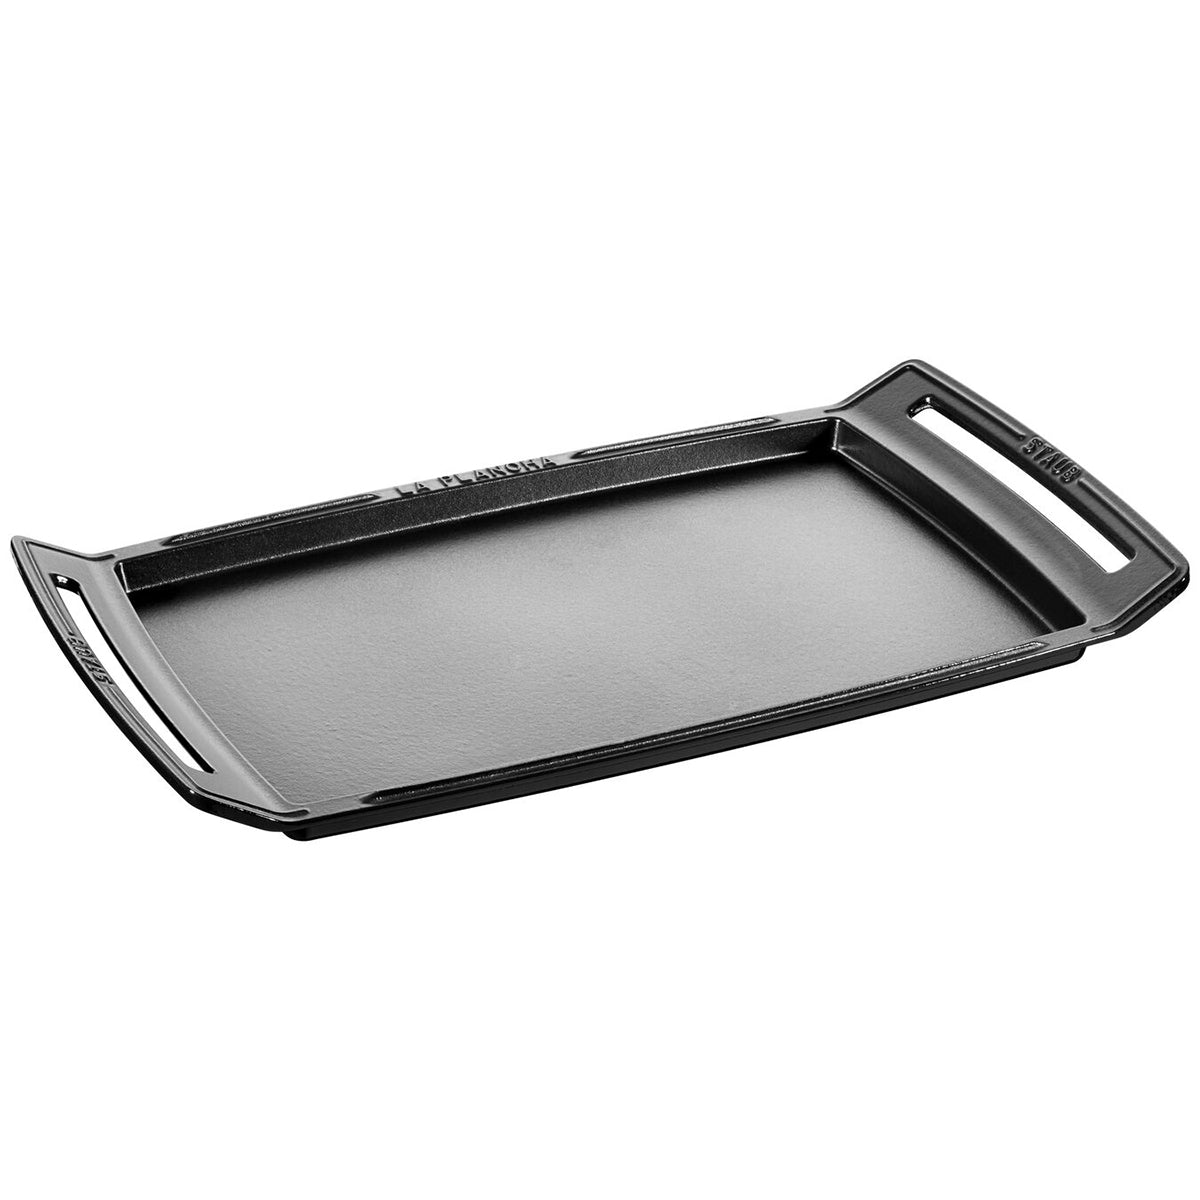 Serving Tray - Cast Iron